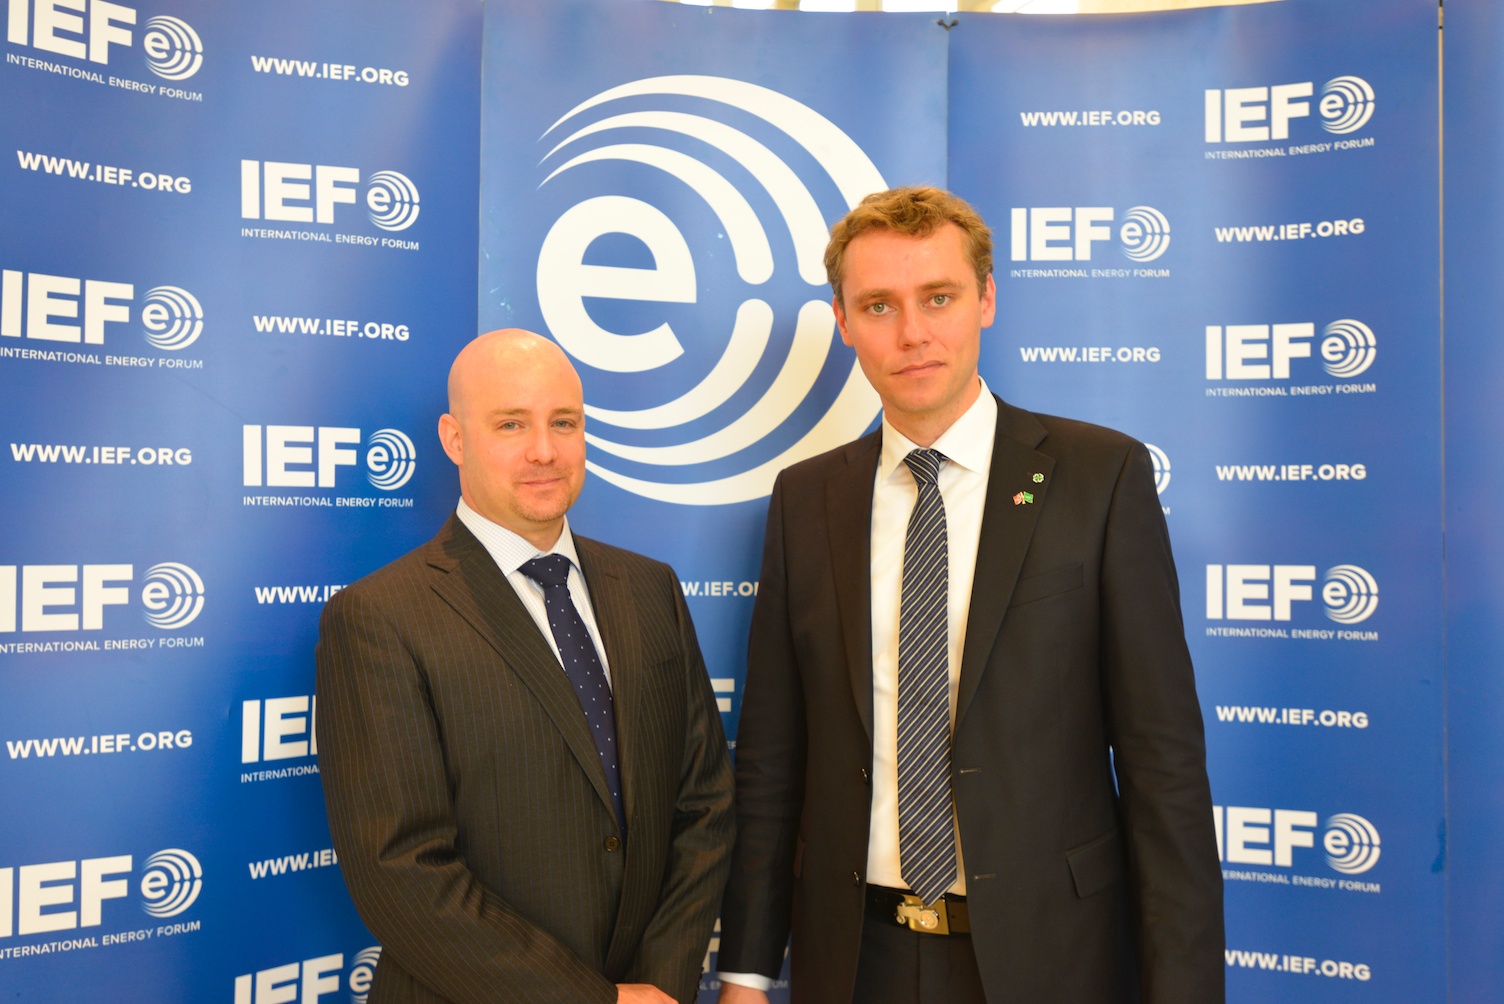 IEF Lecture Norwegian Minister  (54)  04 14 2013